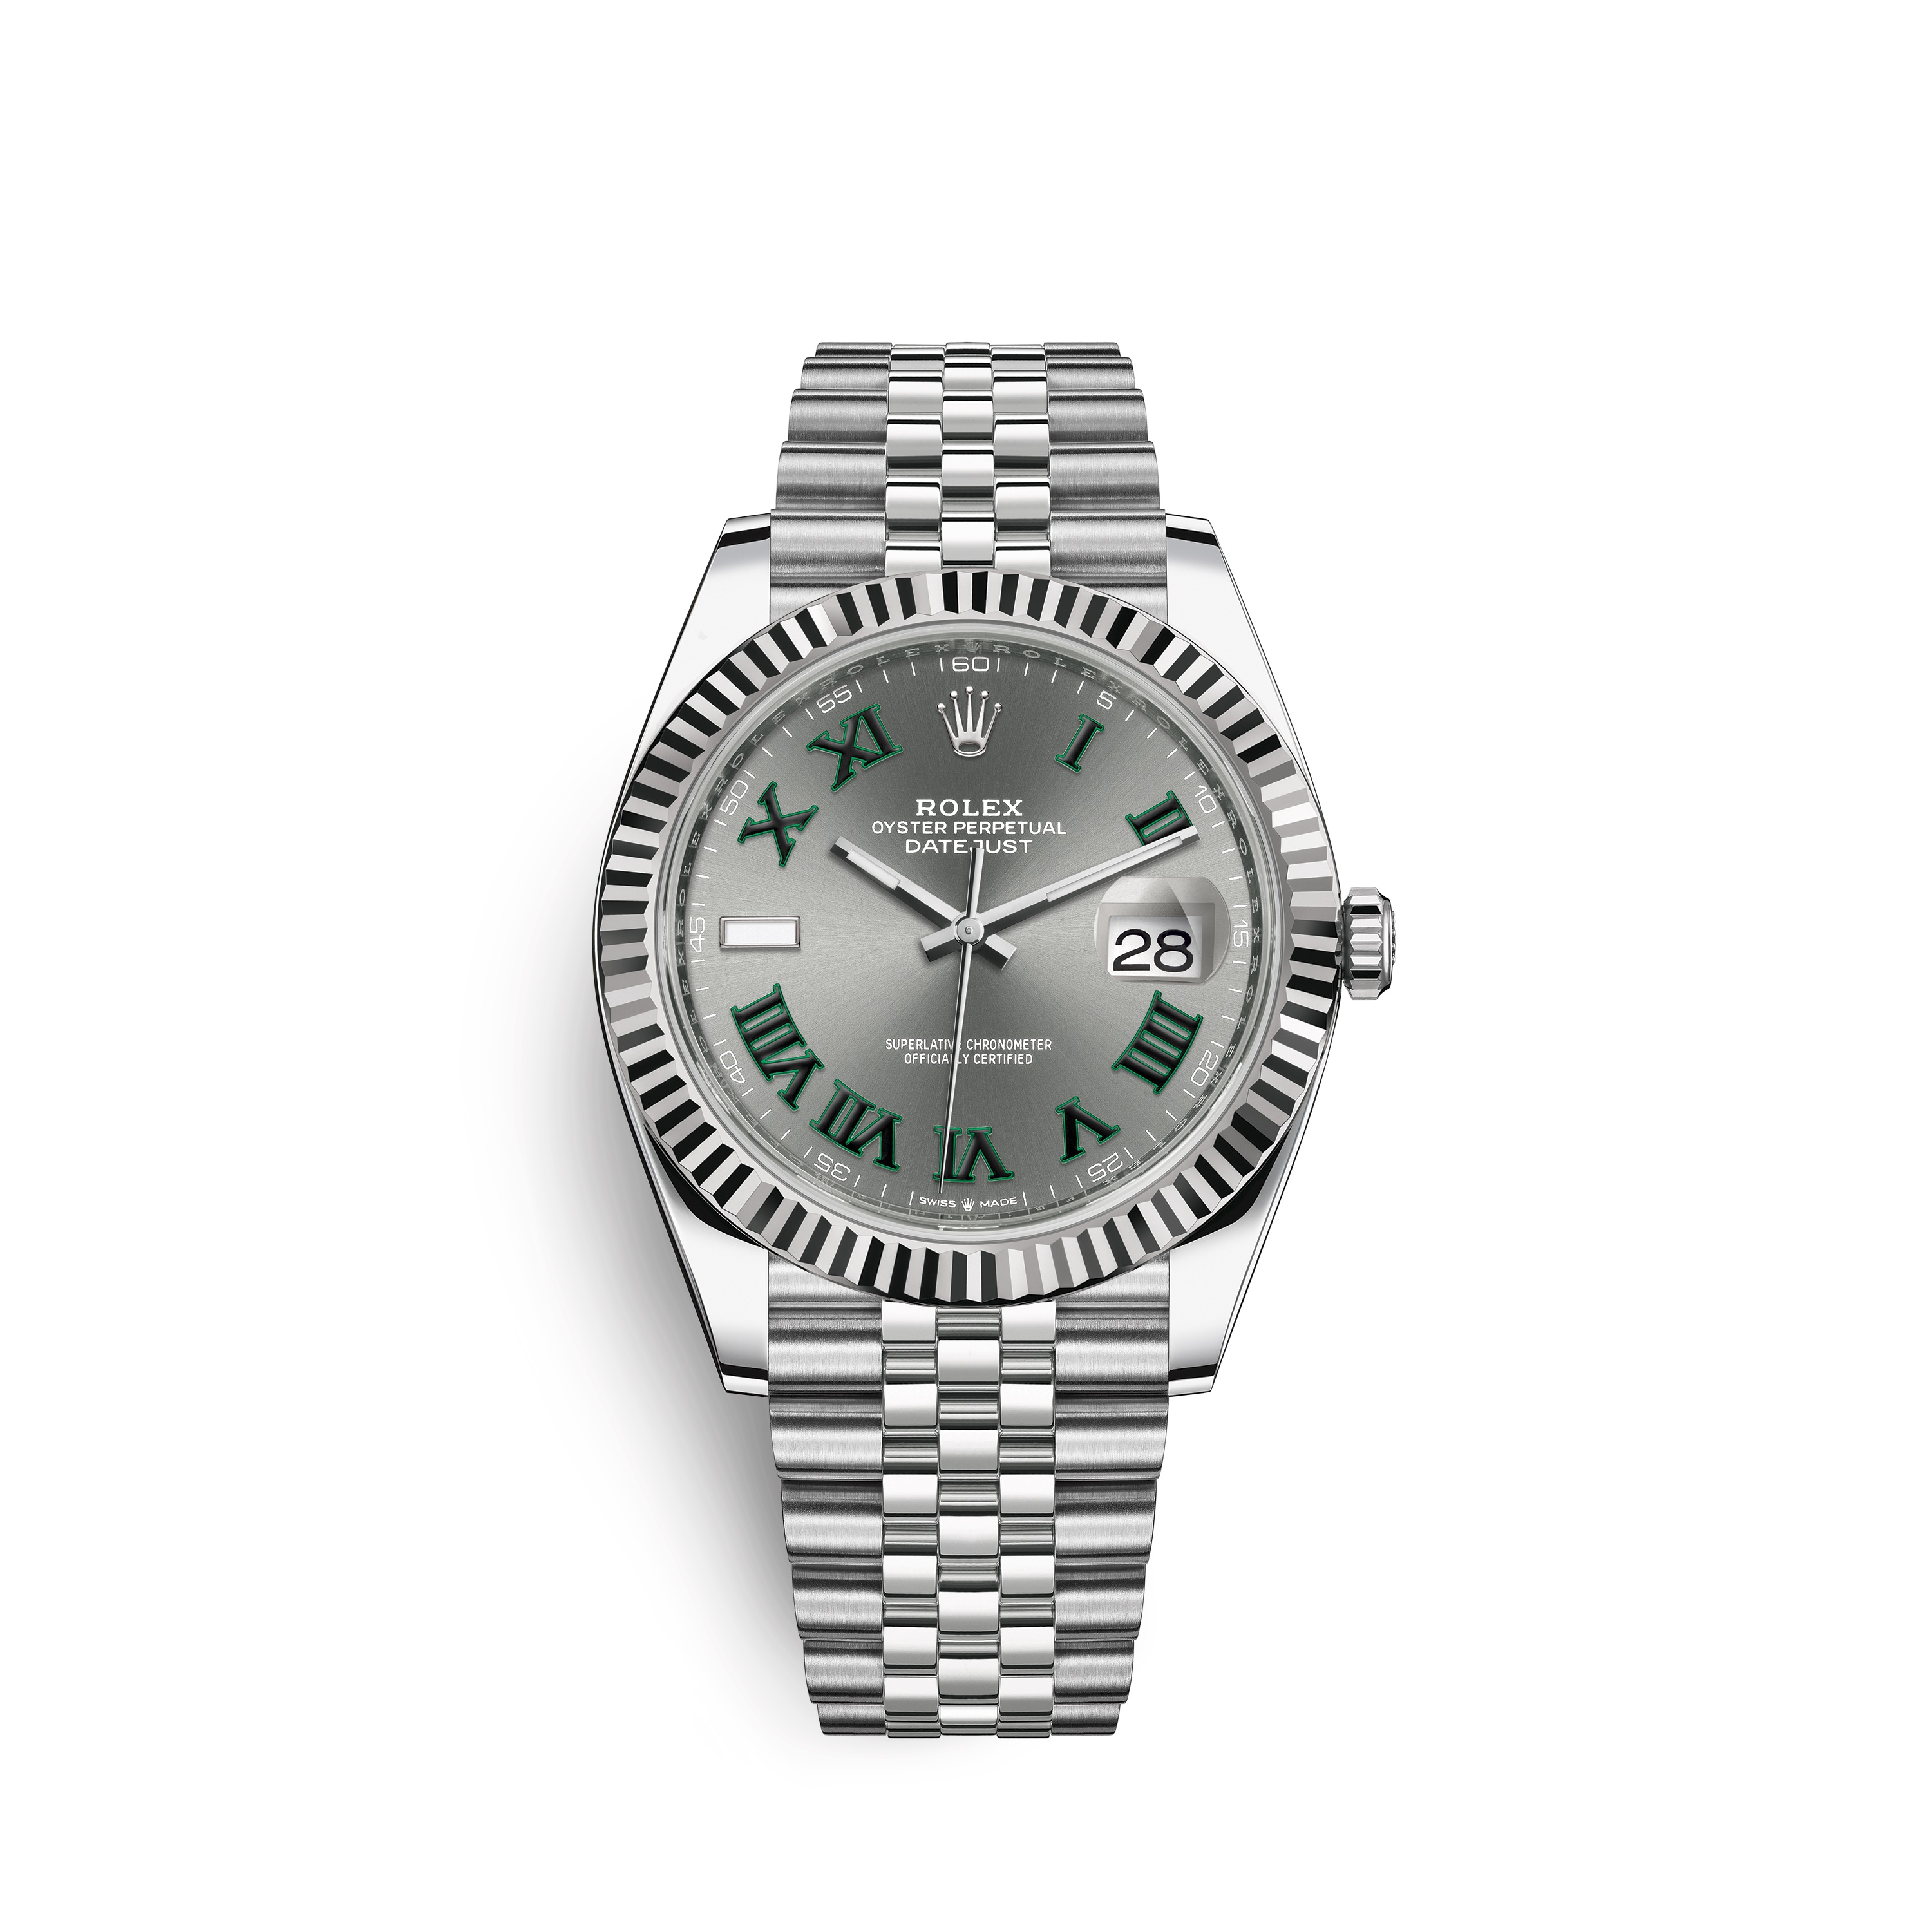 Datejust 41 126334 White Gold & Stainless Steel Watch (Slate)